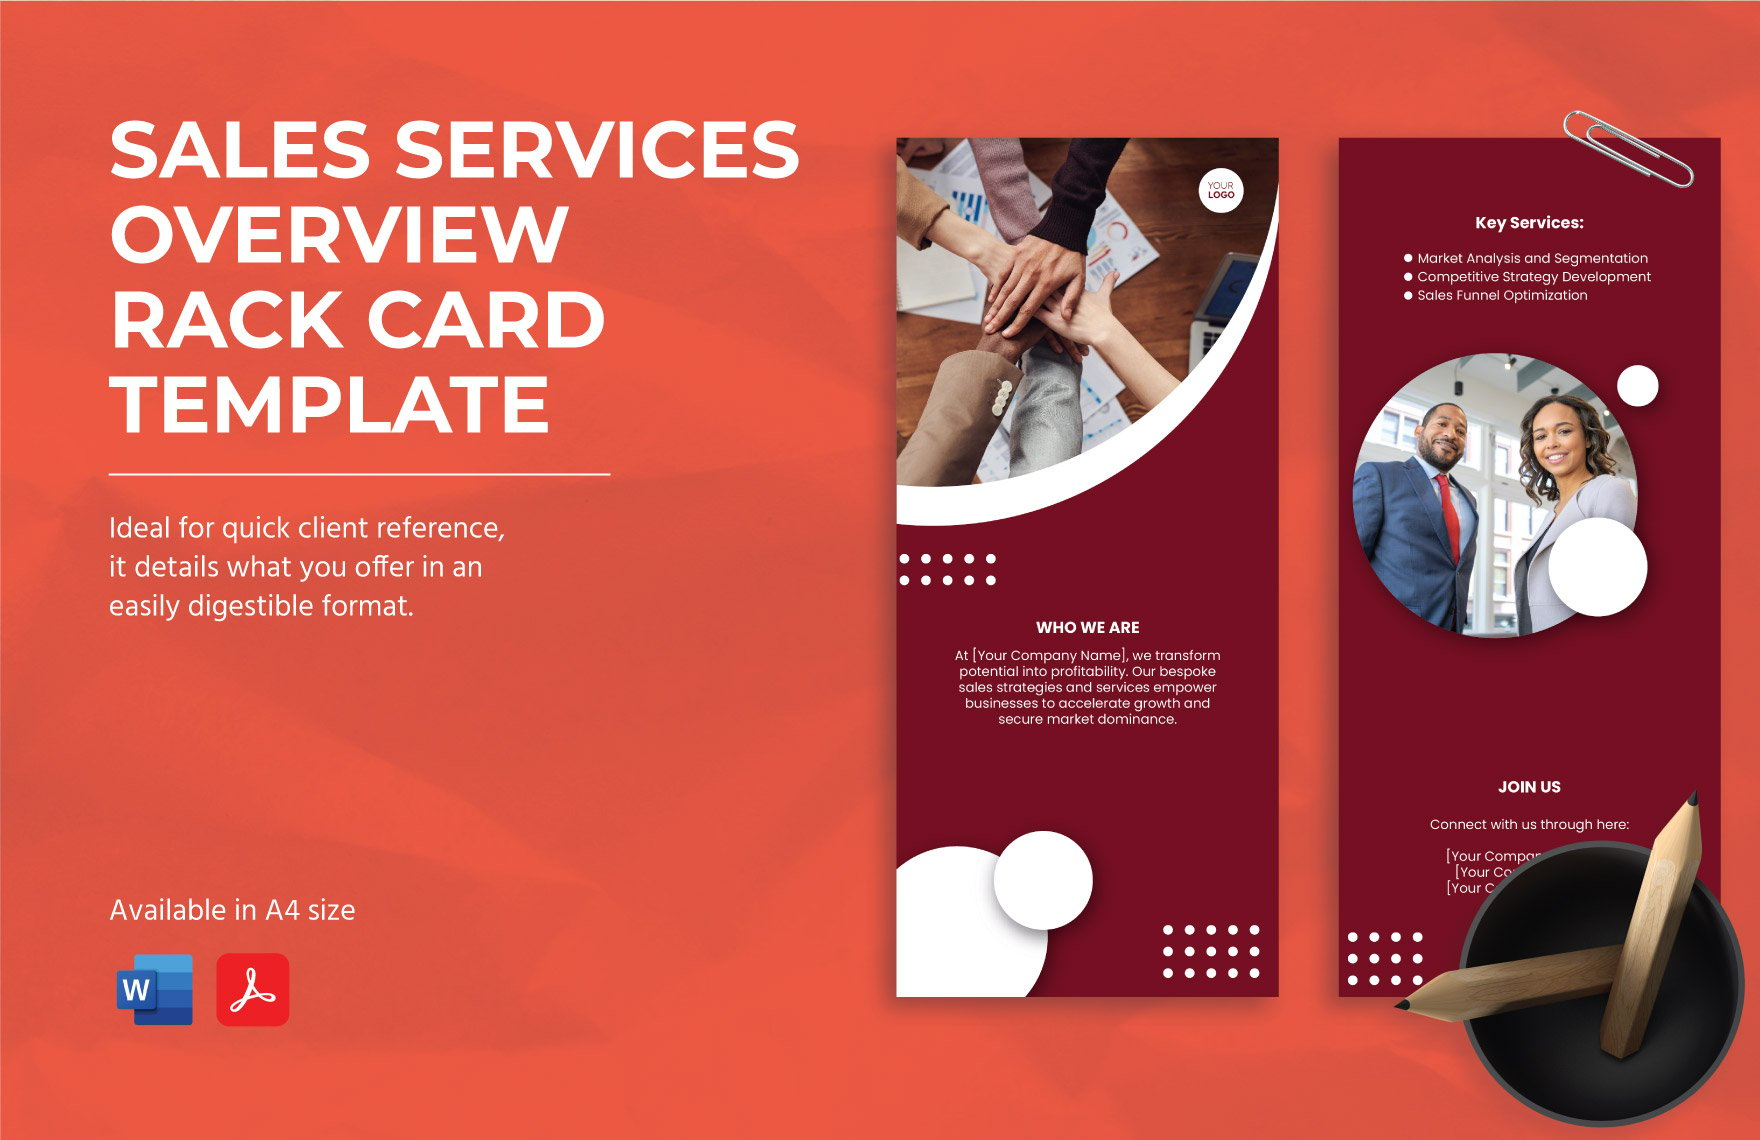 Sales Services Overview Rack Card Template